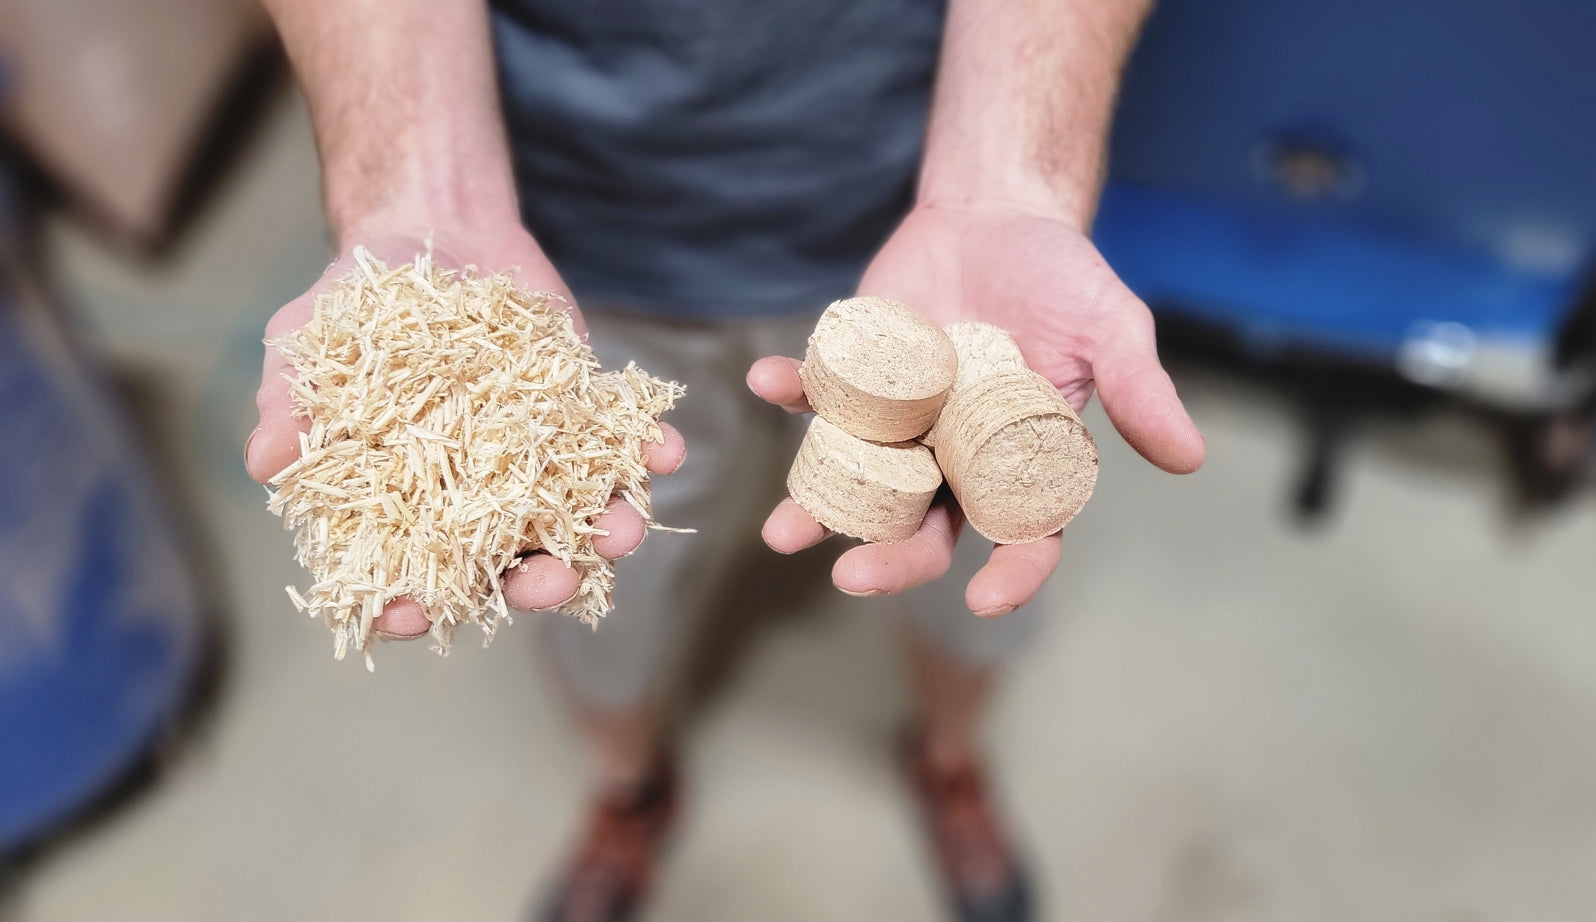 Reducing Sawdust Waste one Briquette at a Time